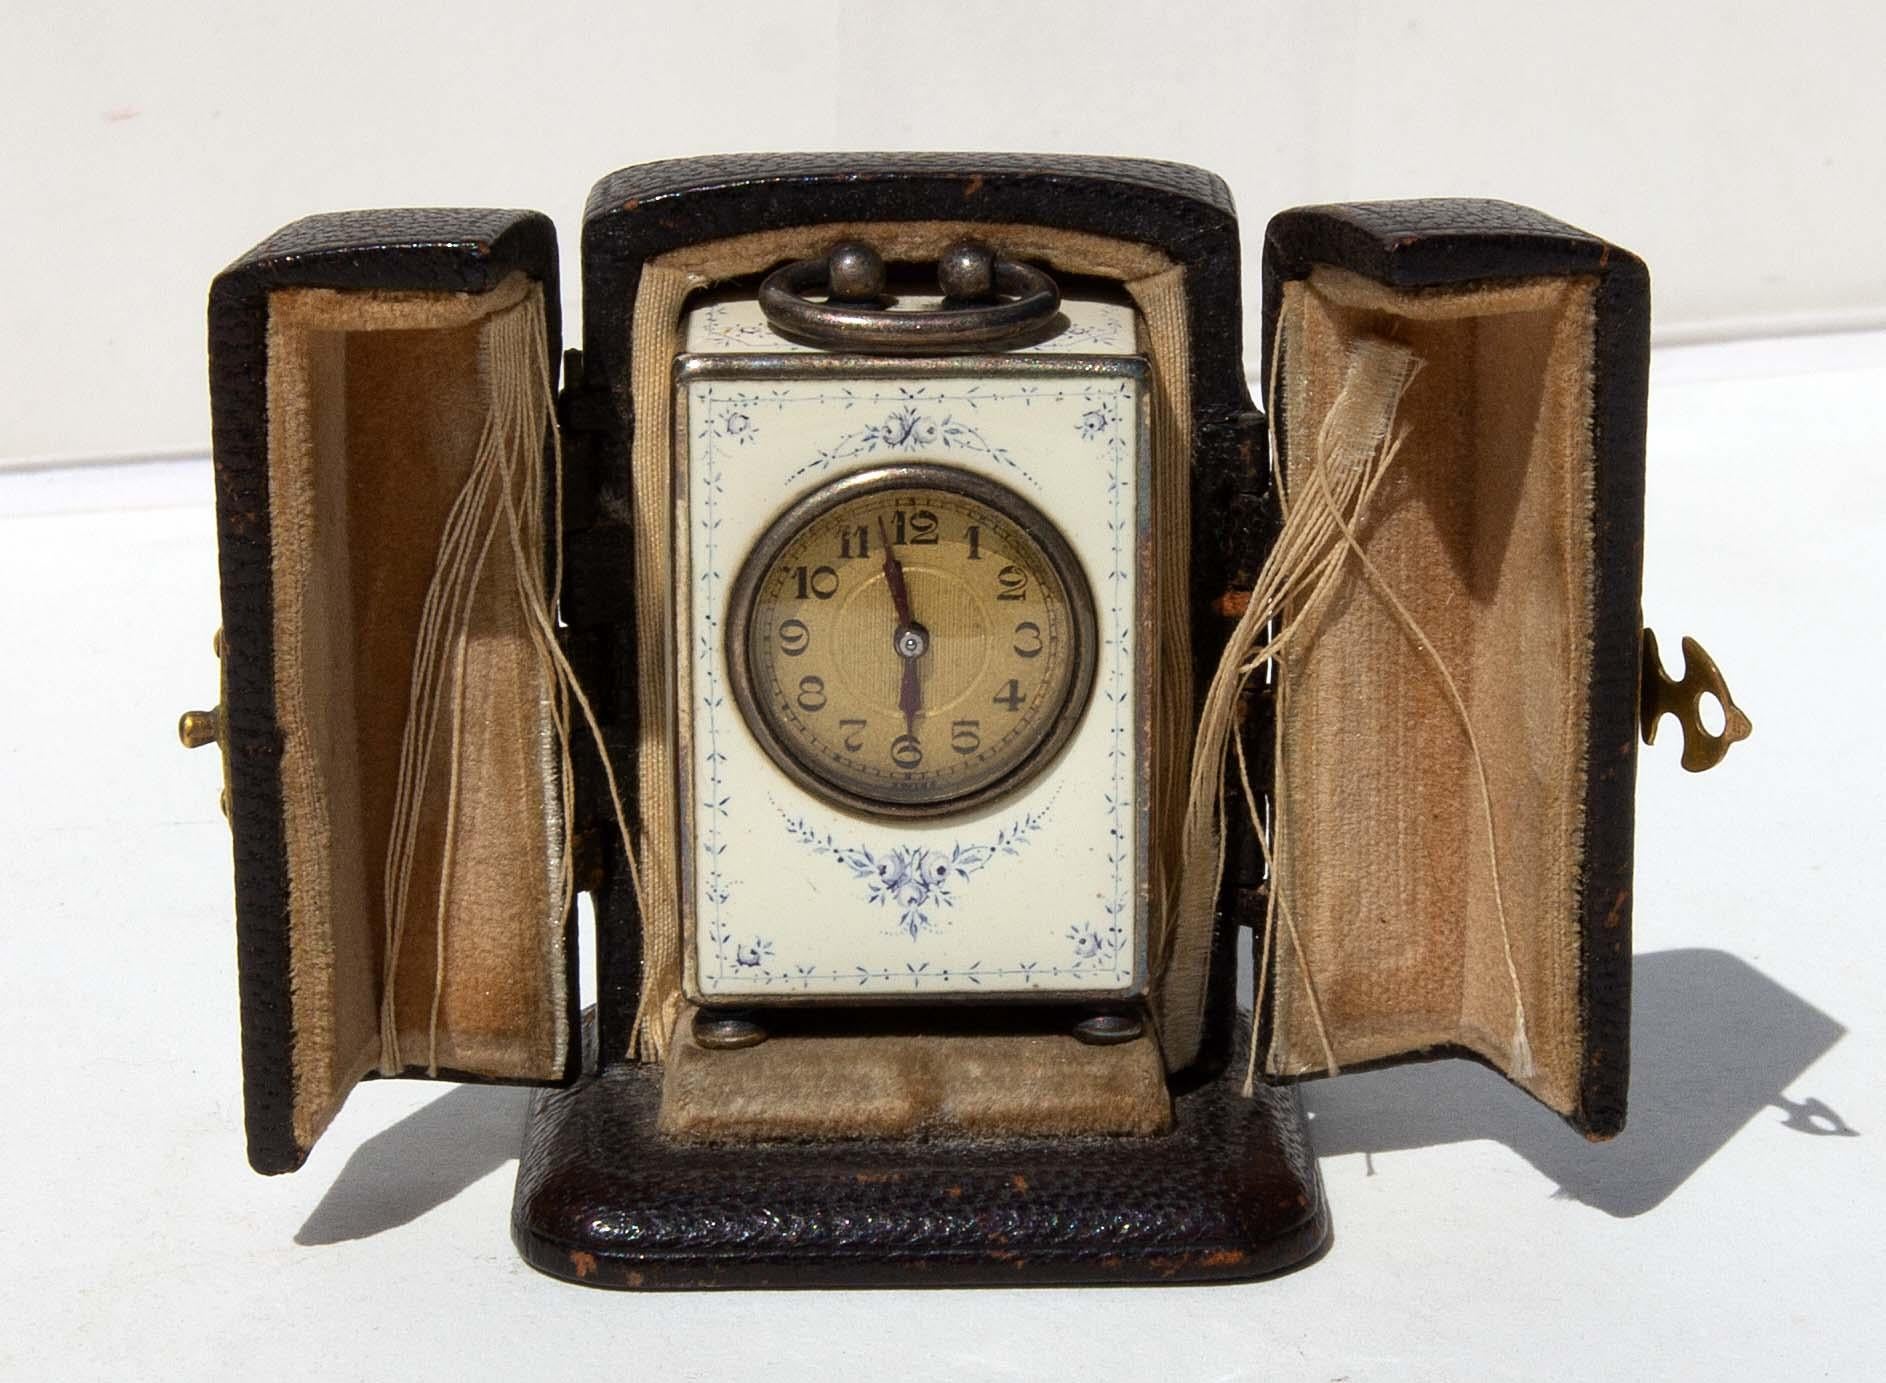 Tiffany sterling silver blue and white 15 jewel enameled travel clock. Includes original fitted leather bound presentation case. Made by Swiss watch maker Concord. Hallmarked, circa 1920. Monogrammed on back. Presented by Joseph Dasta Antiques.